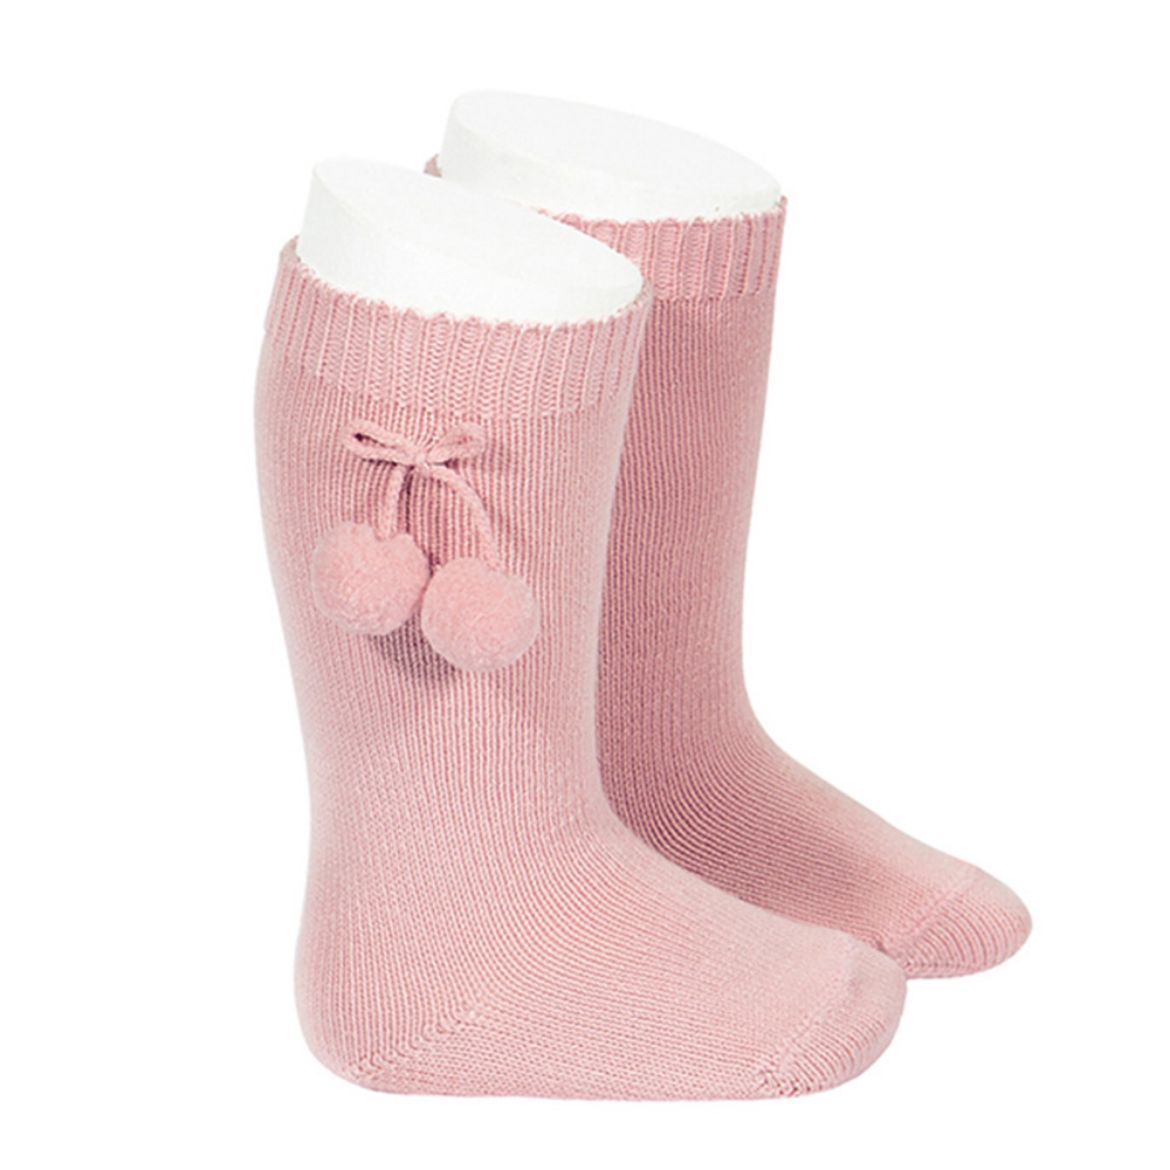 Picture of Condor Knee High Socks with PomPoms - Pale Pink